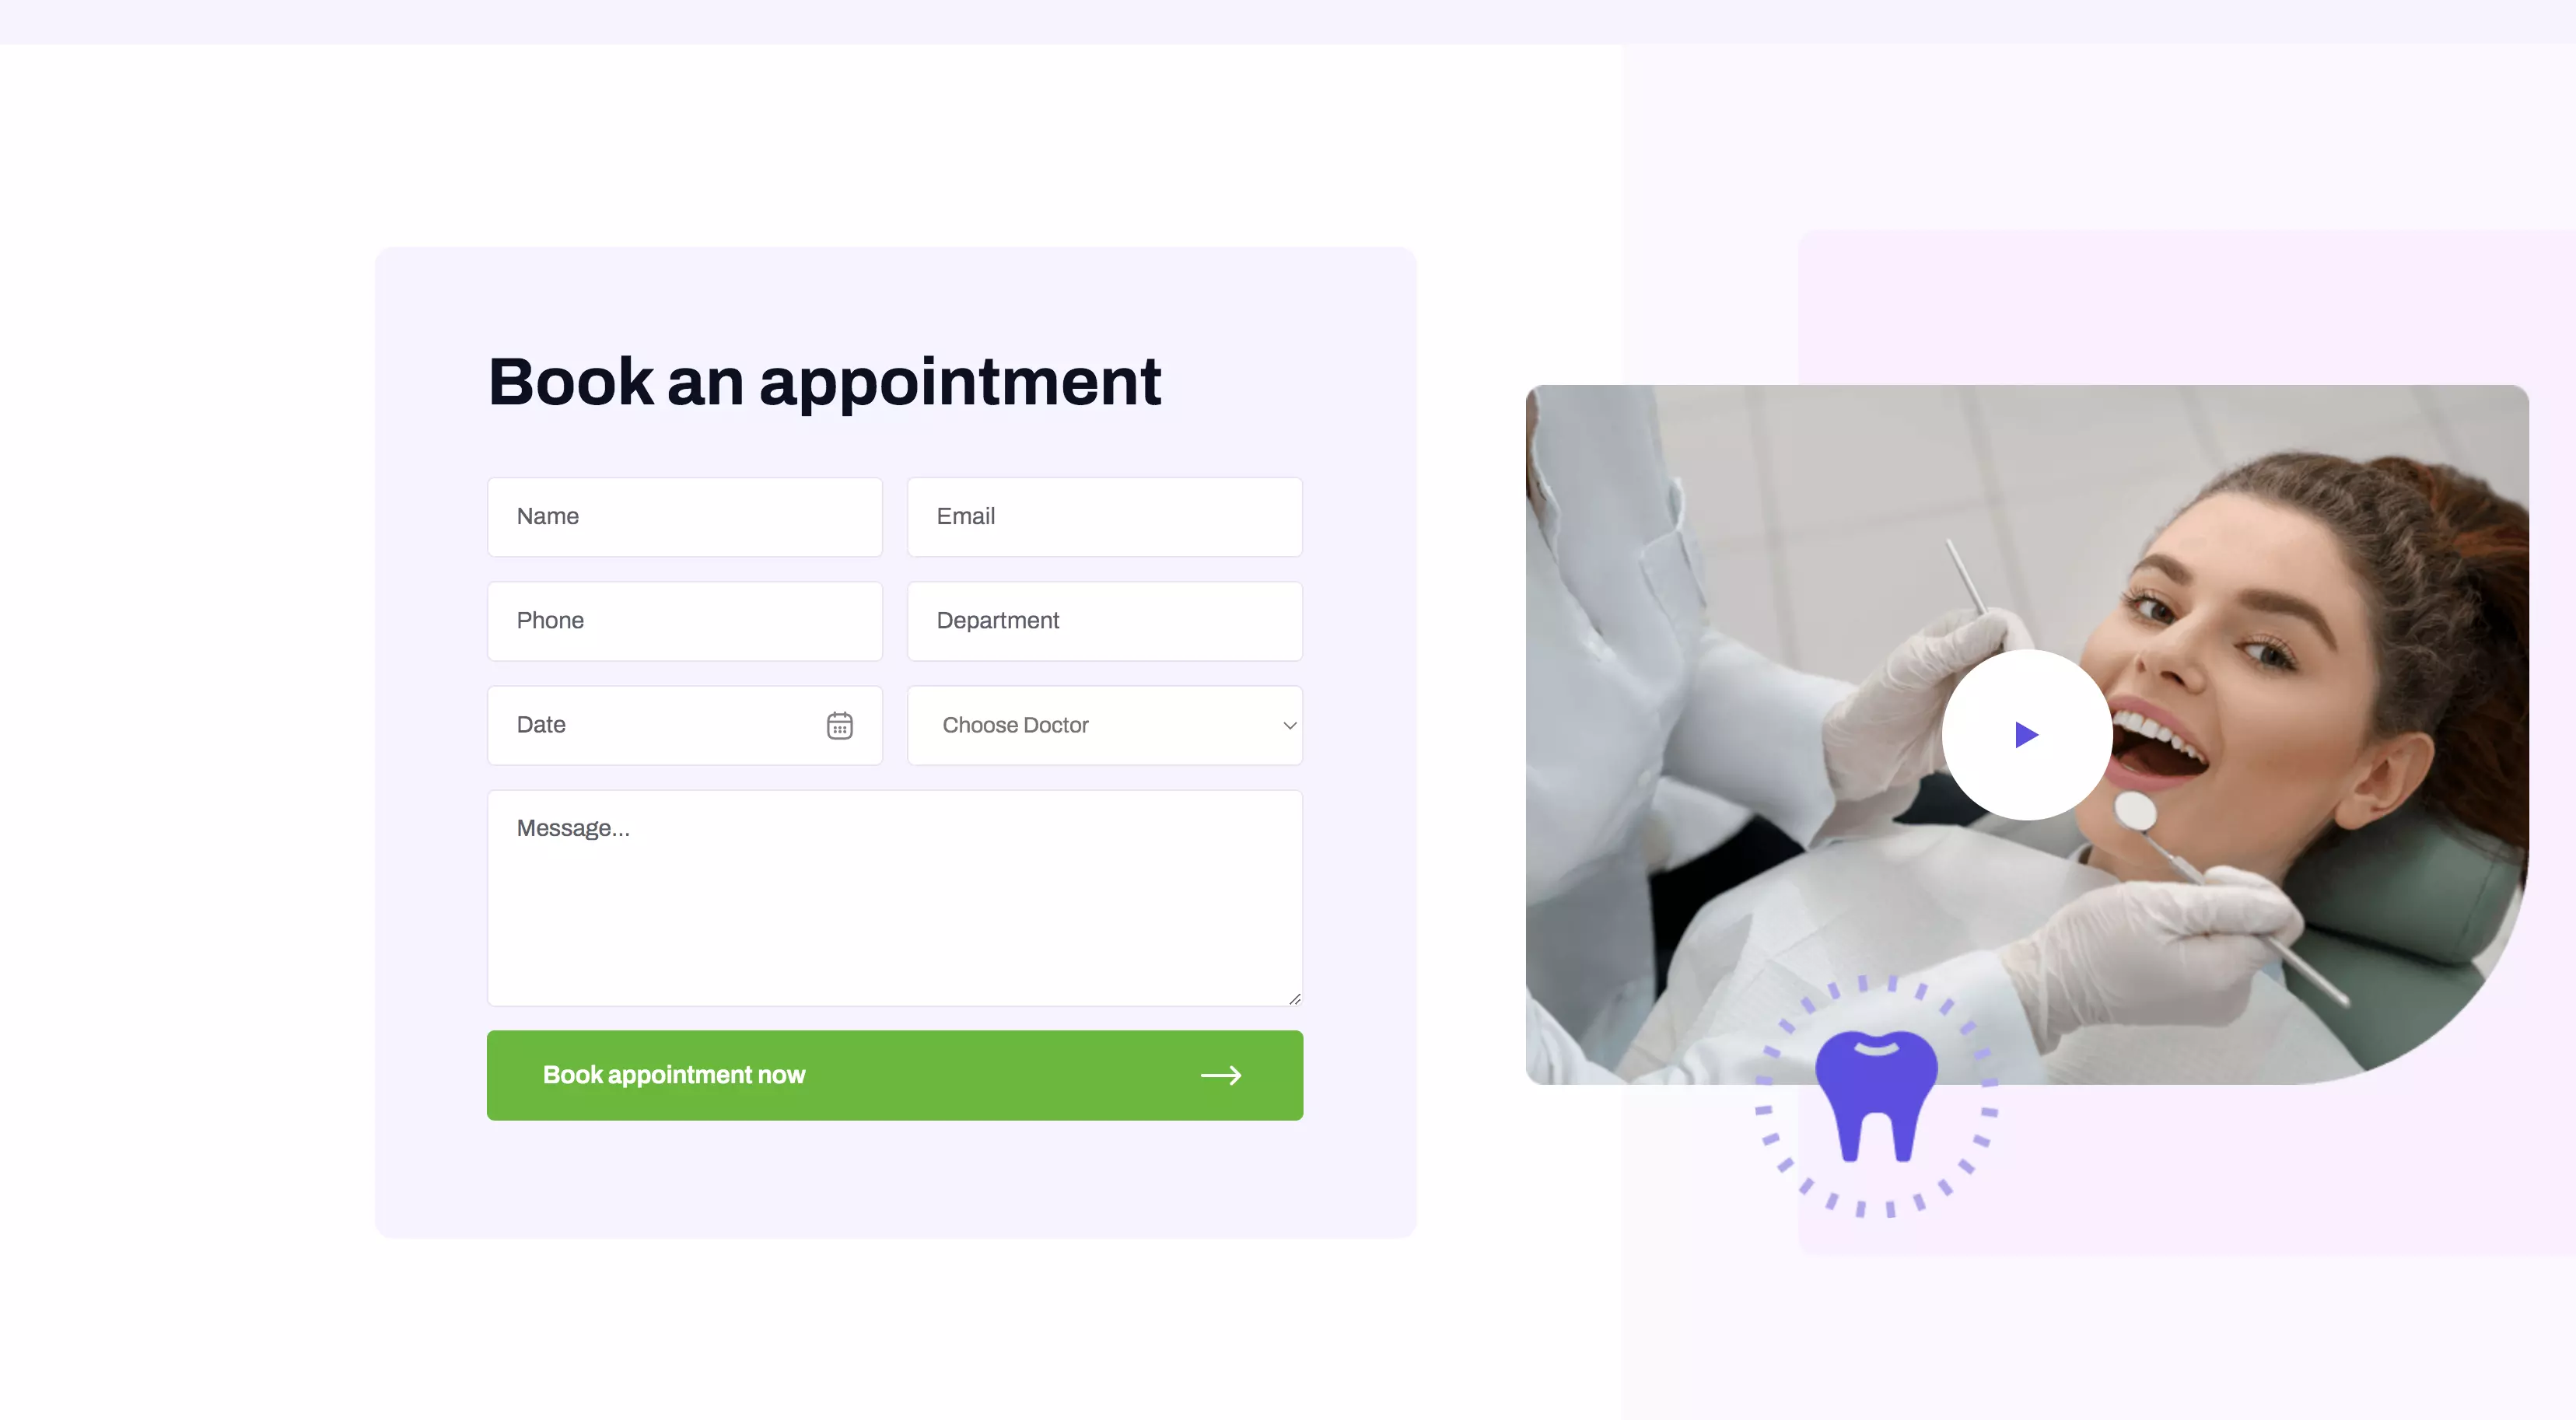 Dental office web site visual example part 4, book an appointment